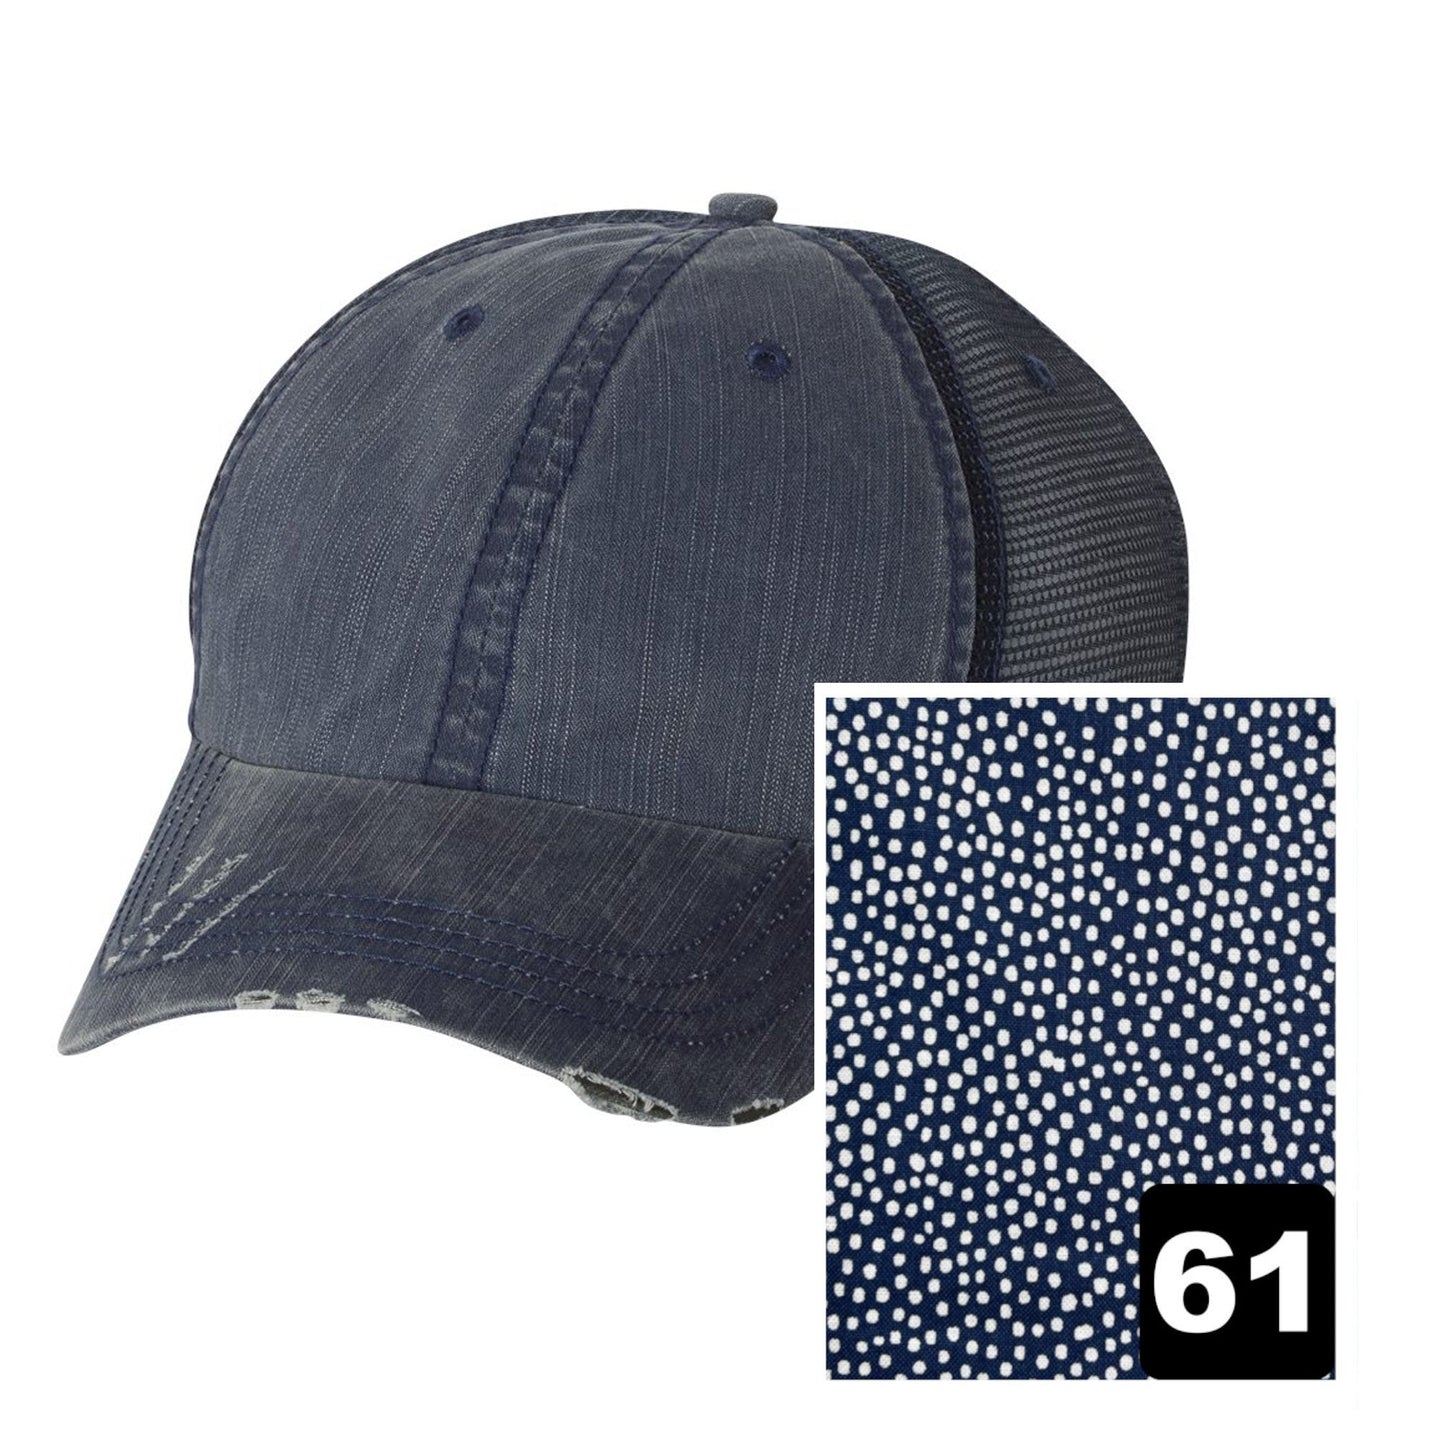 West Virginia Hat | Navy Distressed Trucker Cap | Many Fabric Choices